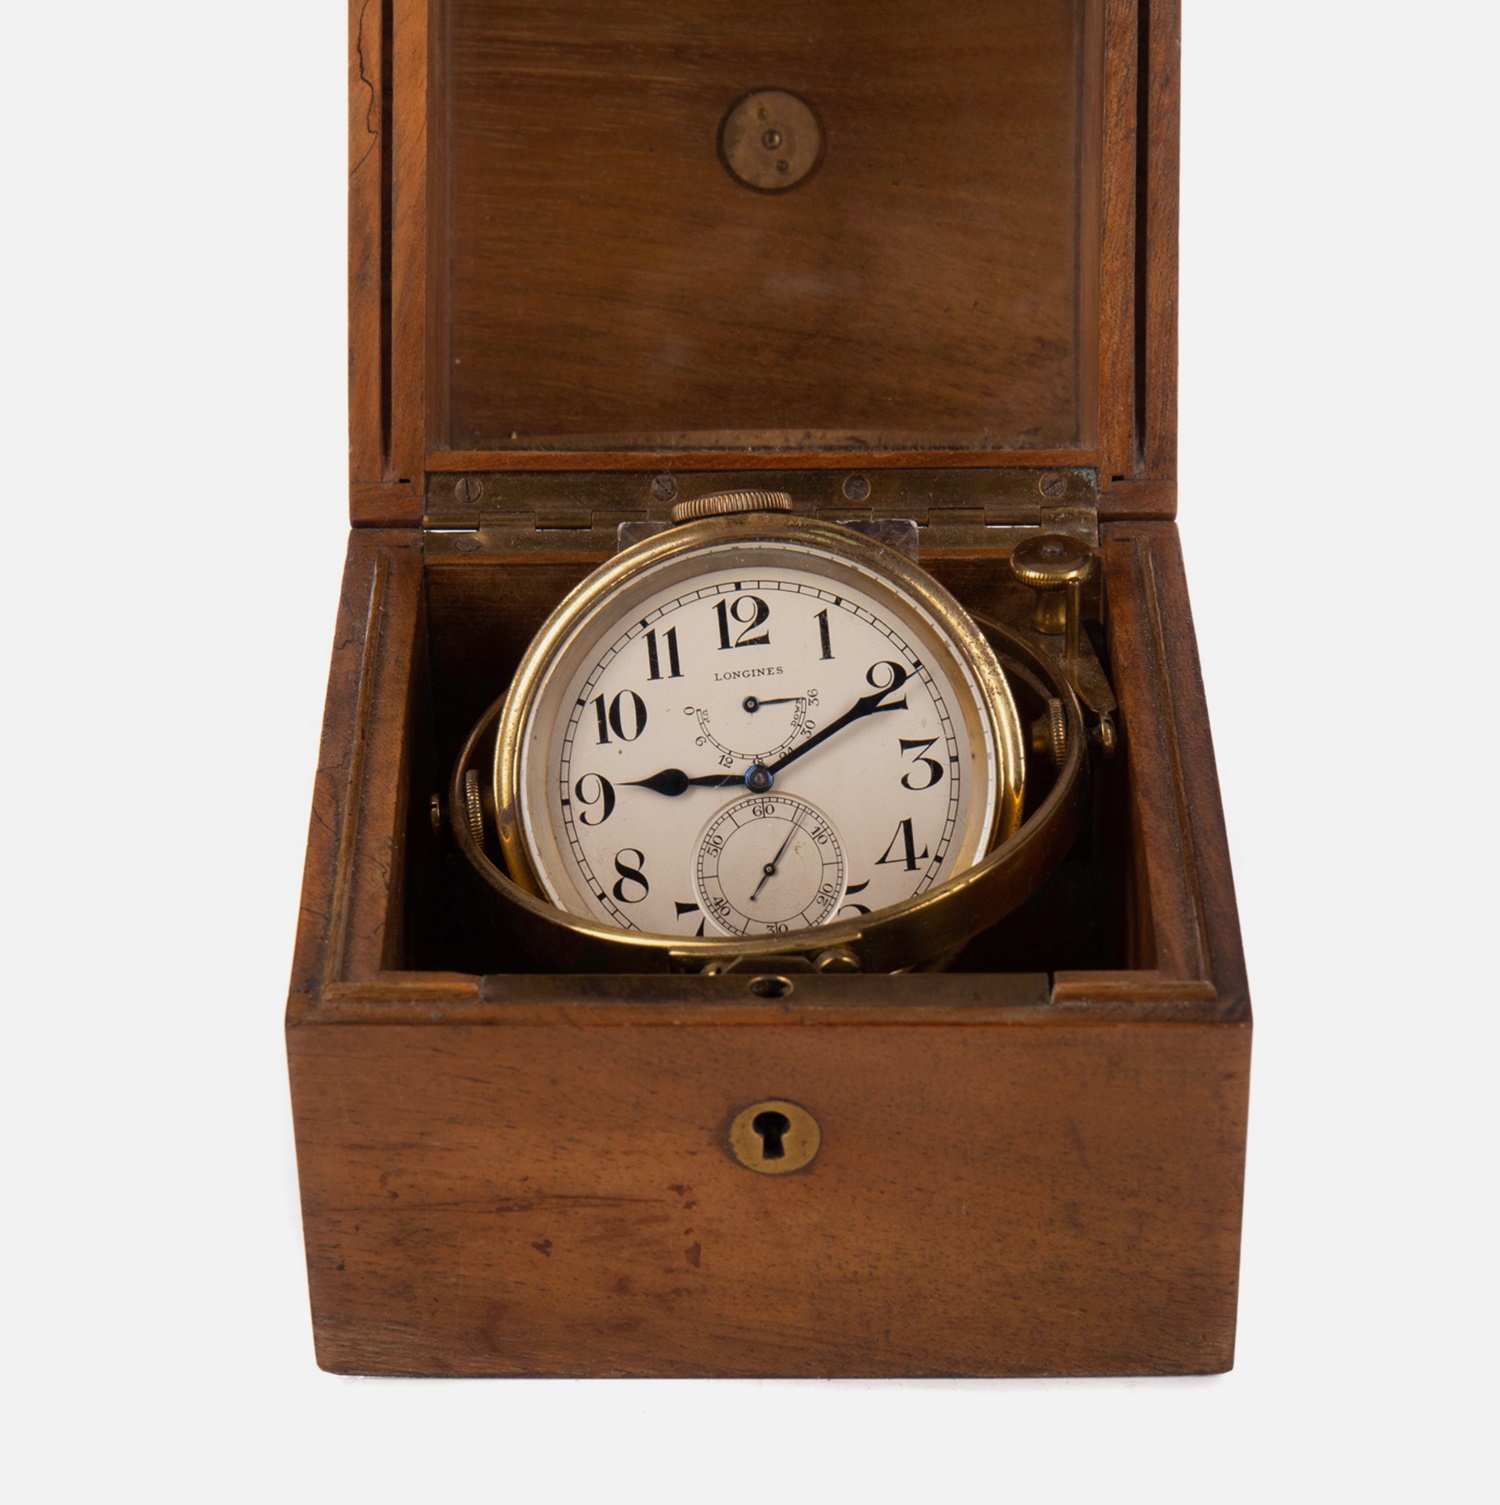 Style & Precision: Clocks, Scientific & Musical Instruments including LeCoultre, Longines & Zeiss